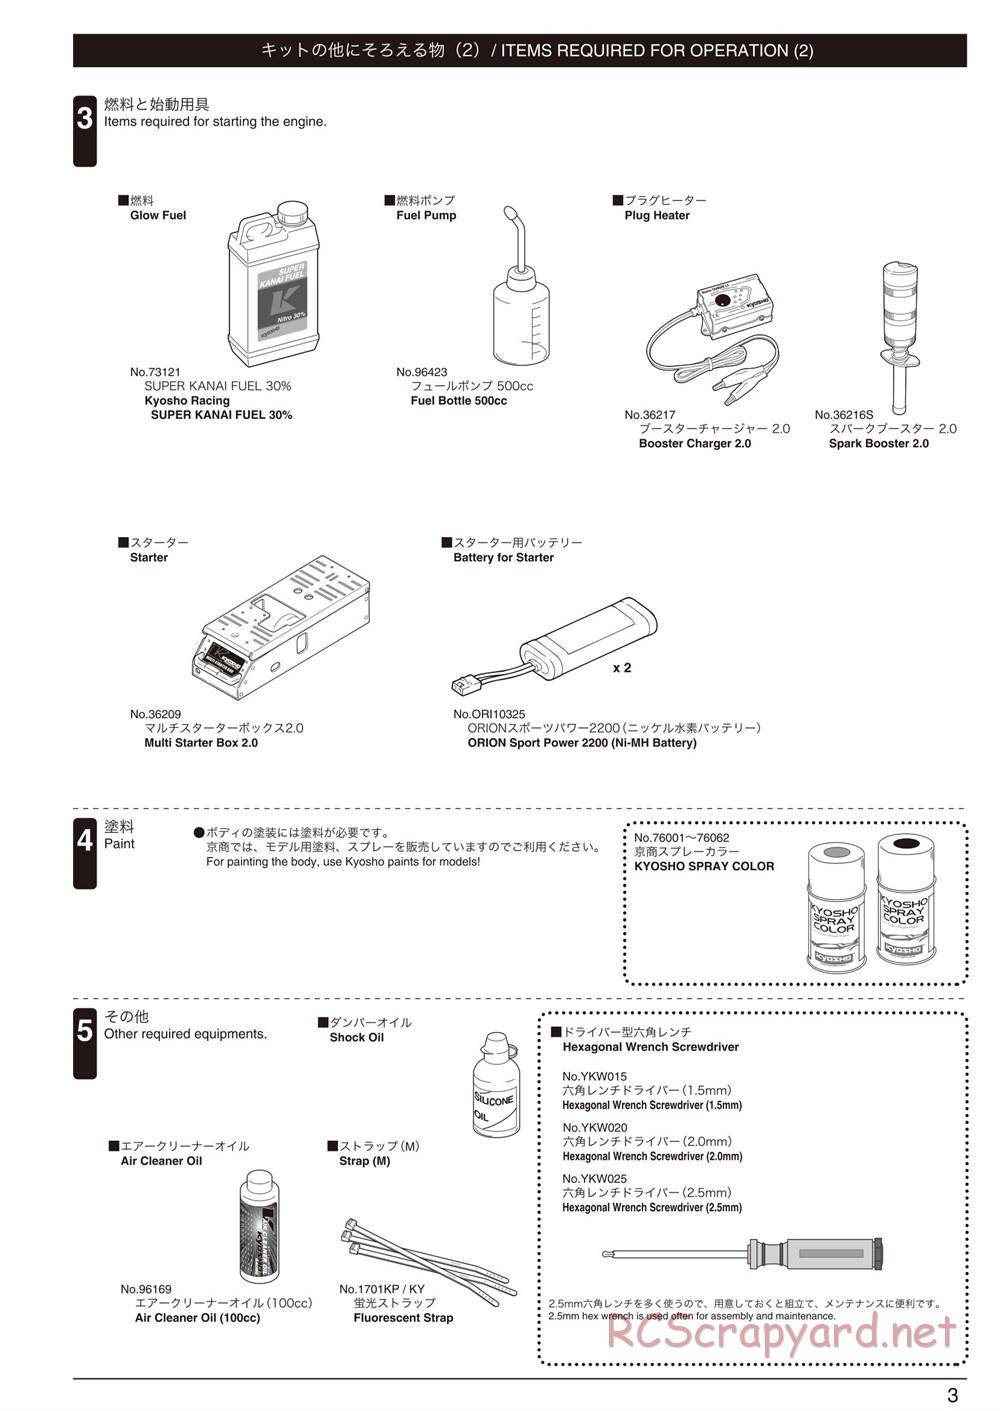 Kyosho - Inferno GT2 - Manual - Page 3